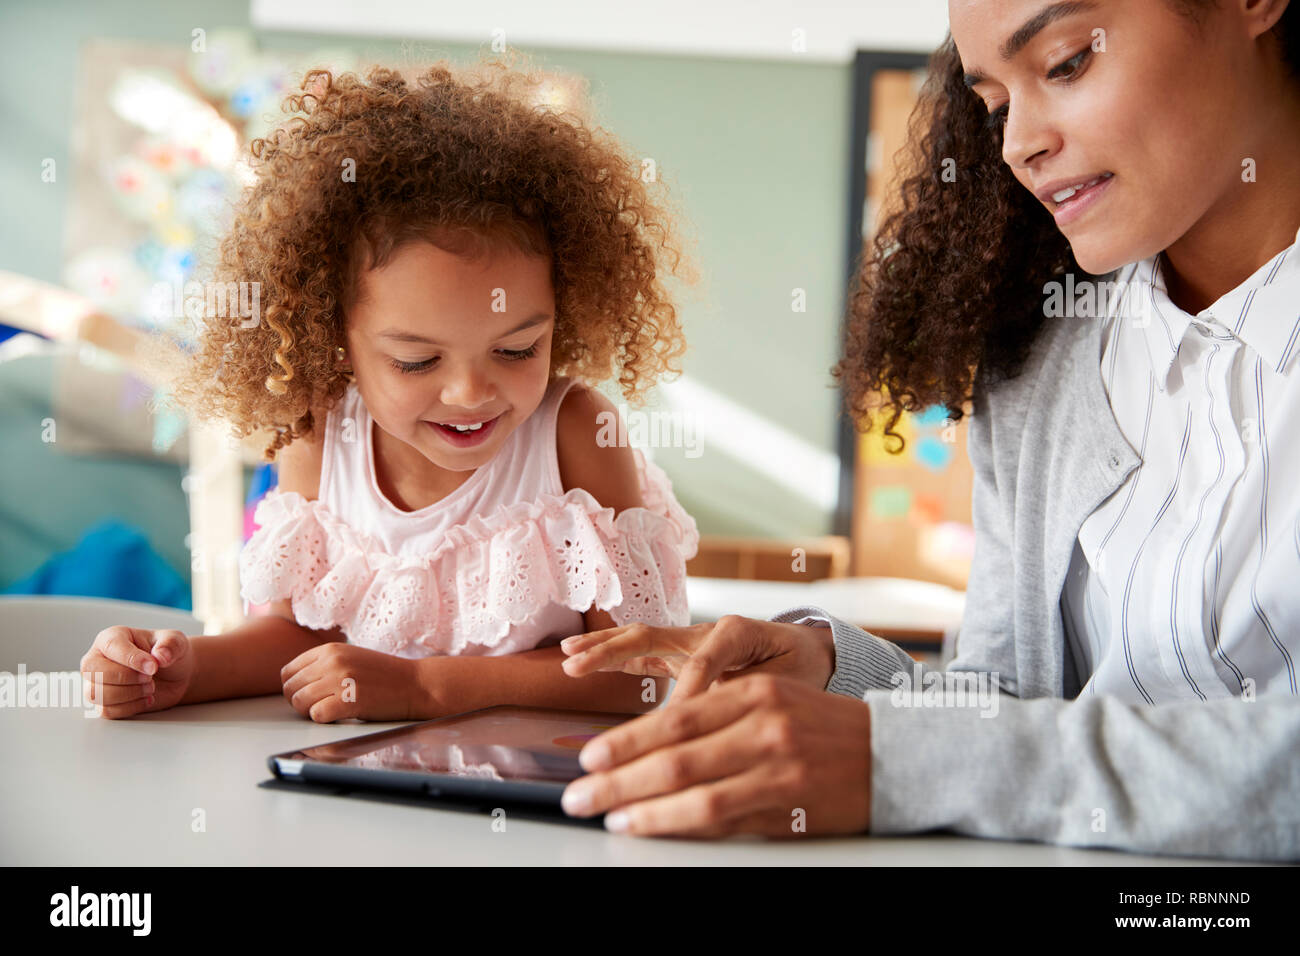 Female infant school teacher using a tablet computer working one on one in a classroom with a young mixed race schoolgirl, selective focus, close up Stock Photo